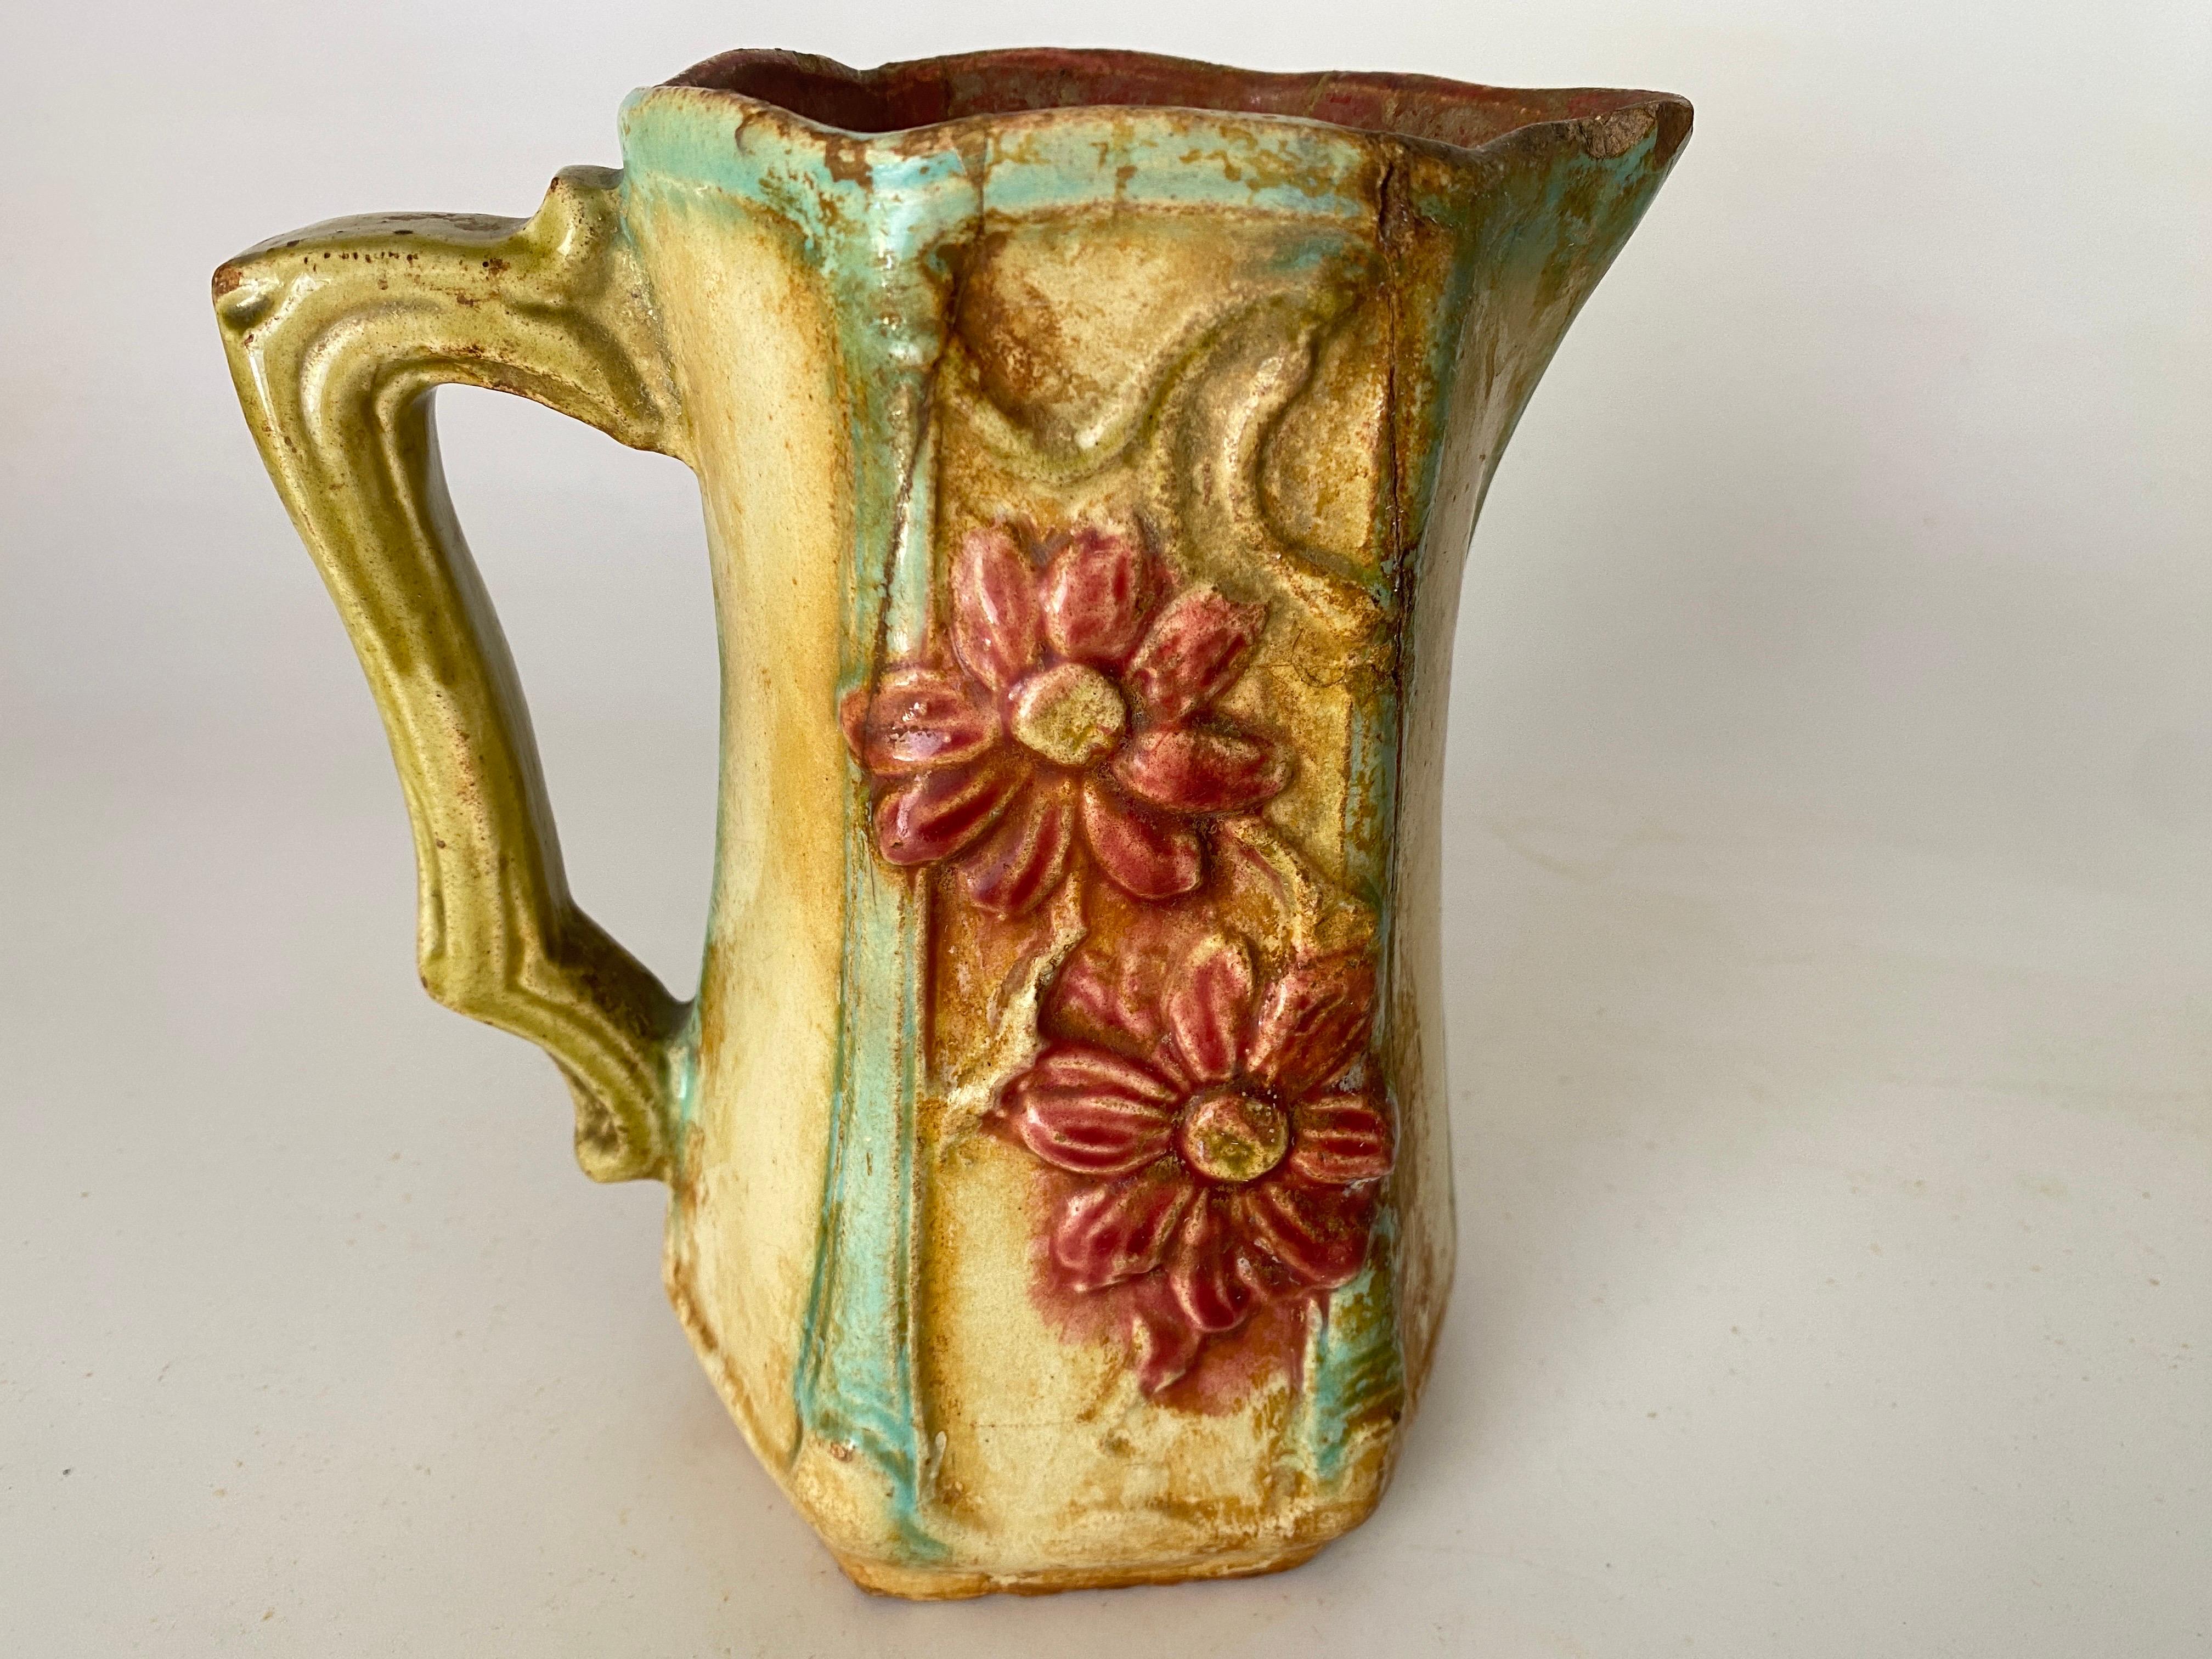  Designed with large green leaves and Red flowers. The top neck with handle circa 1900.